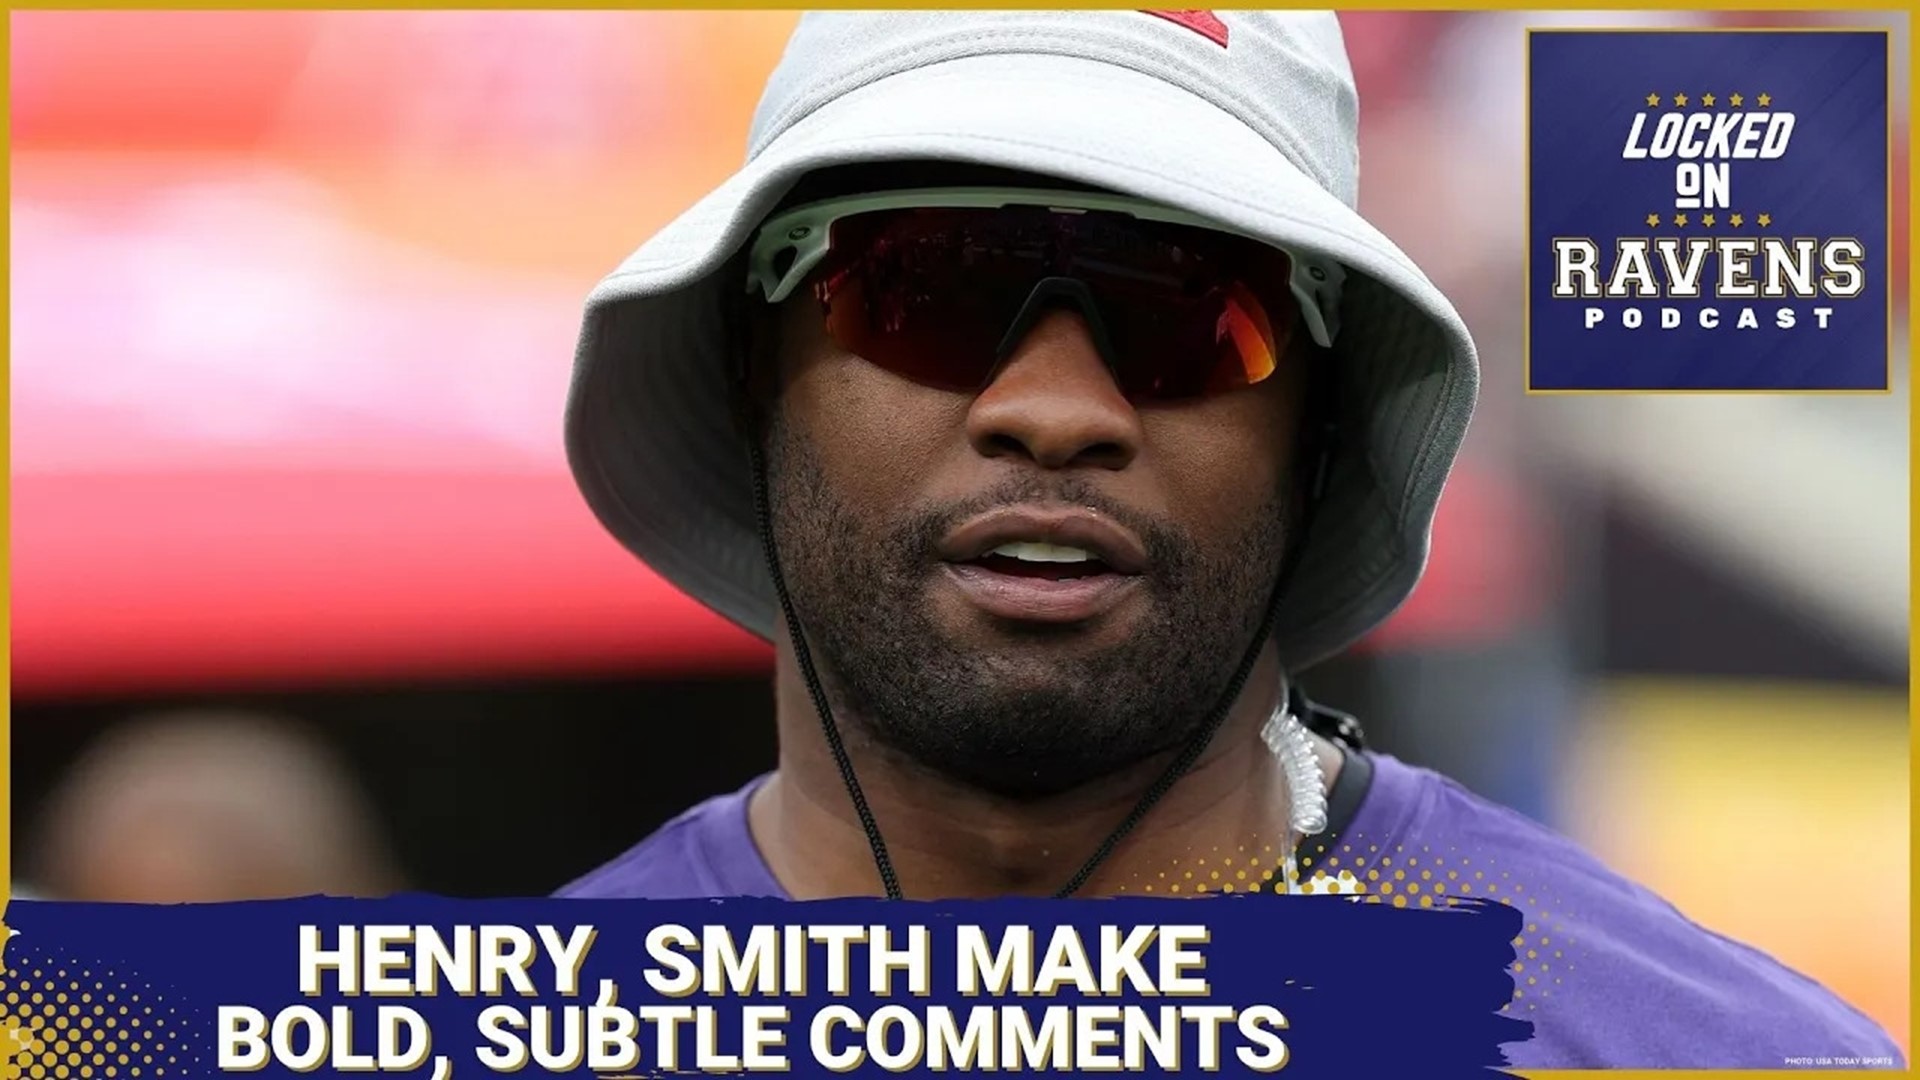 We look at the subtle comments that Derrick Henry and Roquan Smith made about the Baltimore Ravens with Qadry Ismail, looking at what was said and more.